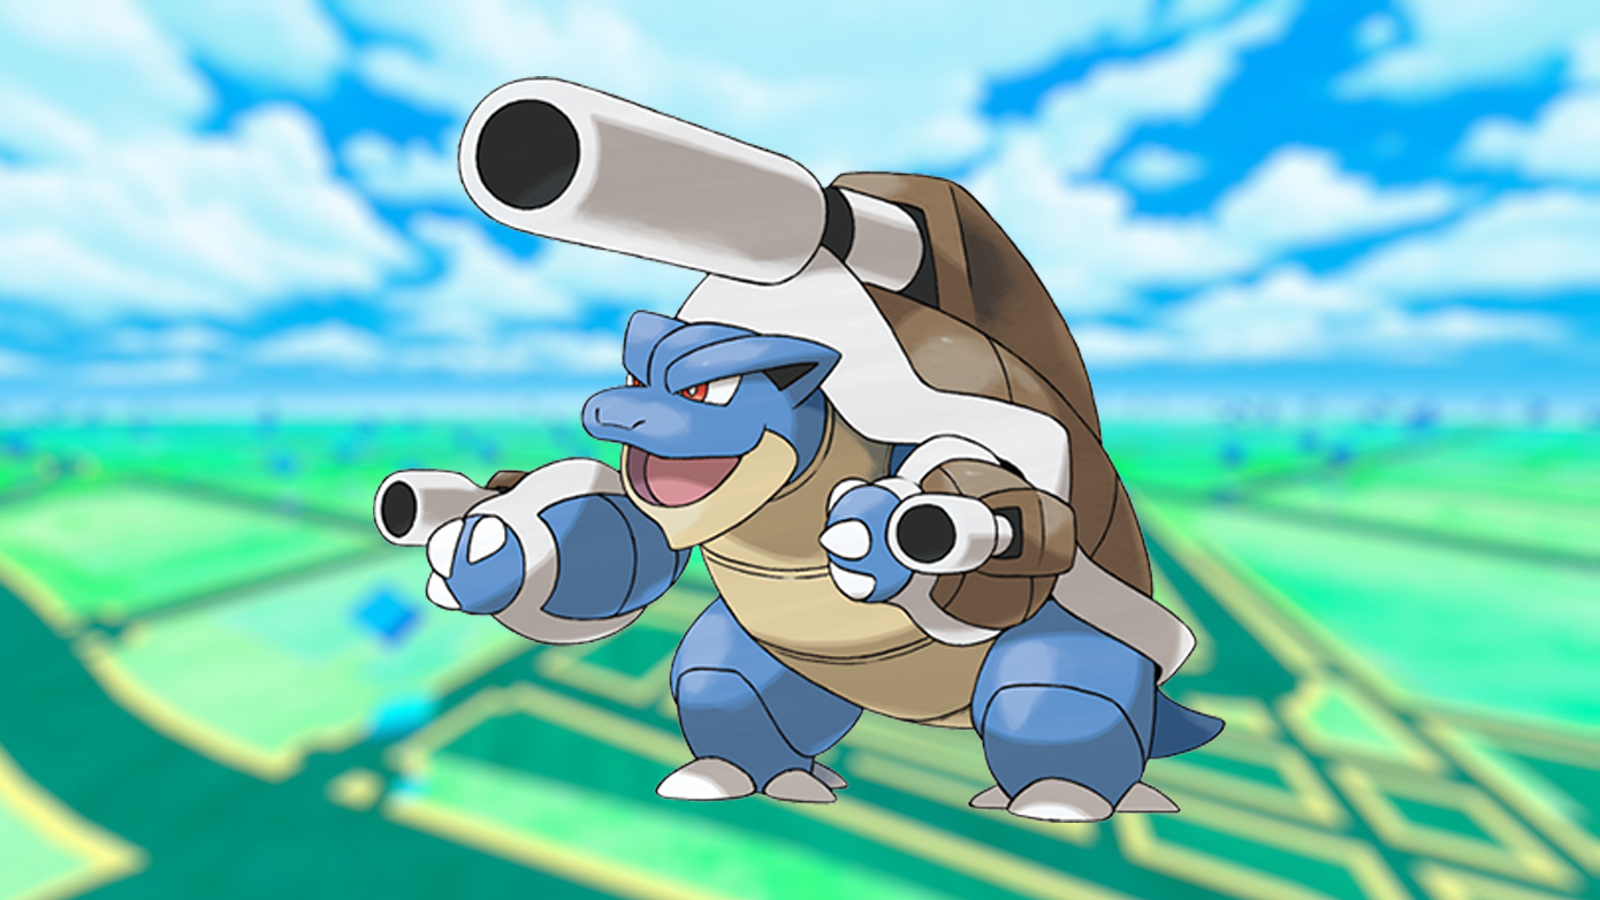 Wartortle (Pokémon GO): Stats, Moves, Counters, Evolution